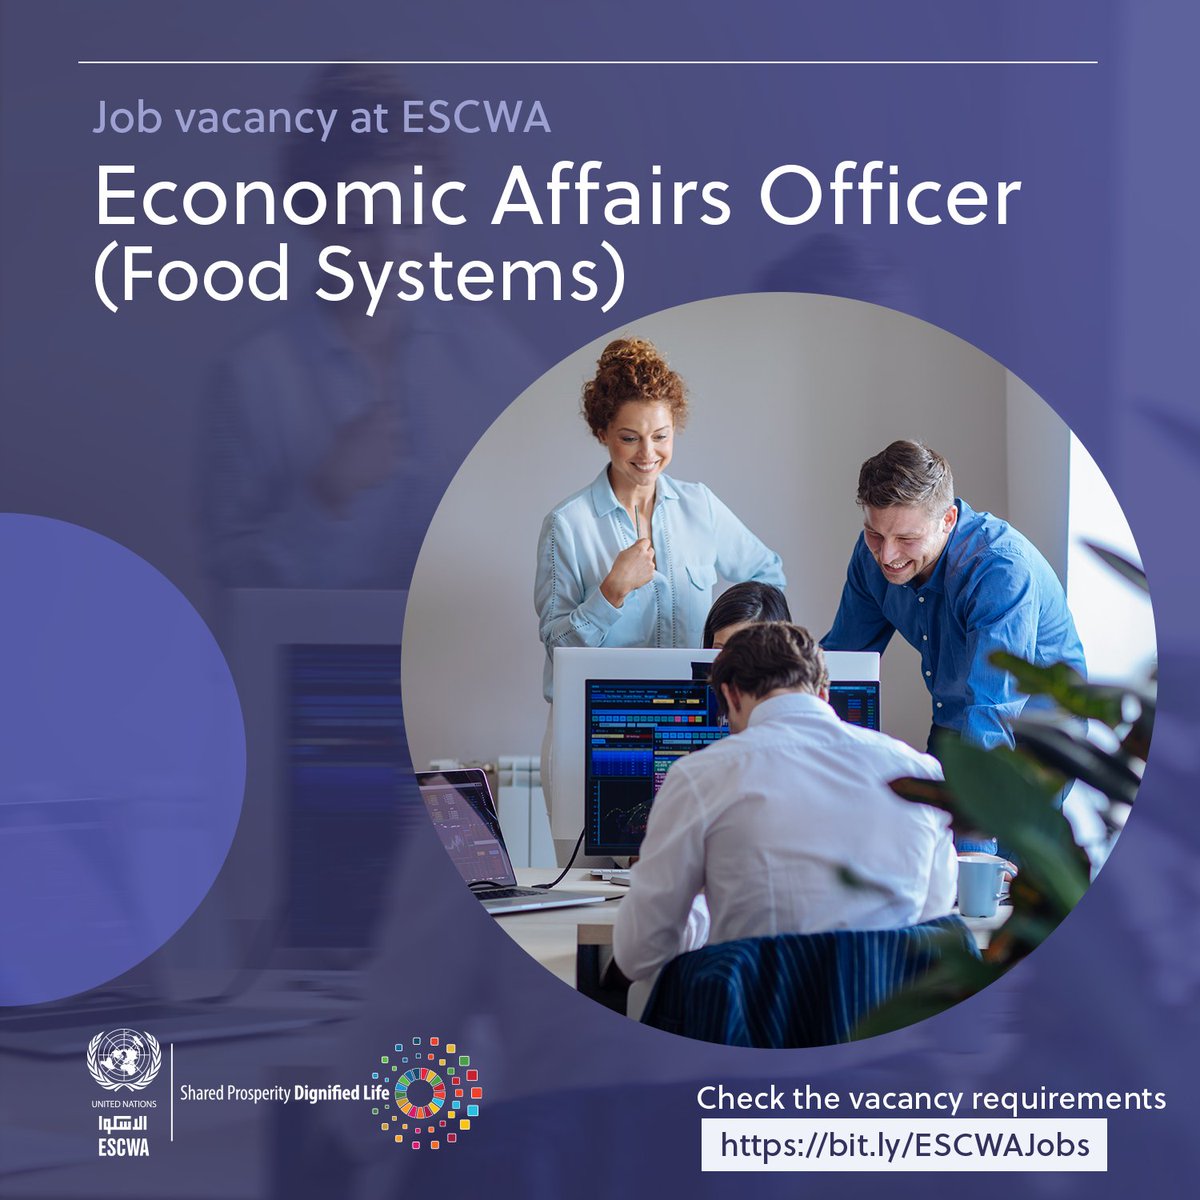 Do you want to become a part of #ESCWA? If you have 5+ years of experience in economic research and analysis and food security/food systems policy formulation, apply now for the Economic Affairs Officer (Food Systems) position 👉 bit.ly/ESCWAJobs. 📆 Deadline: 1 June